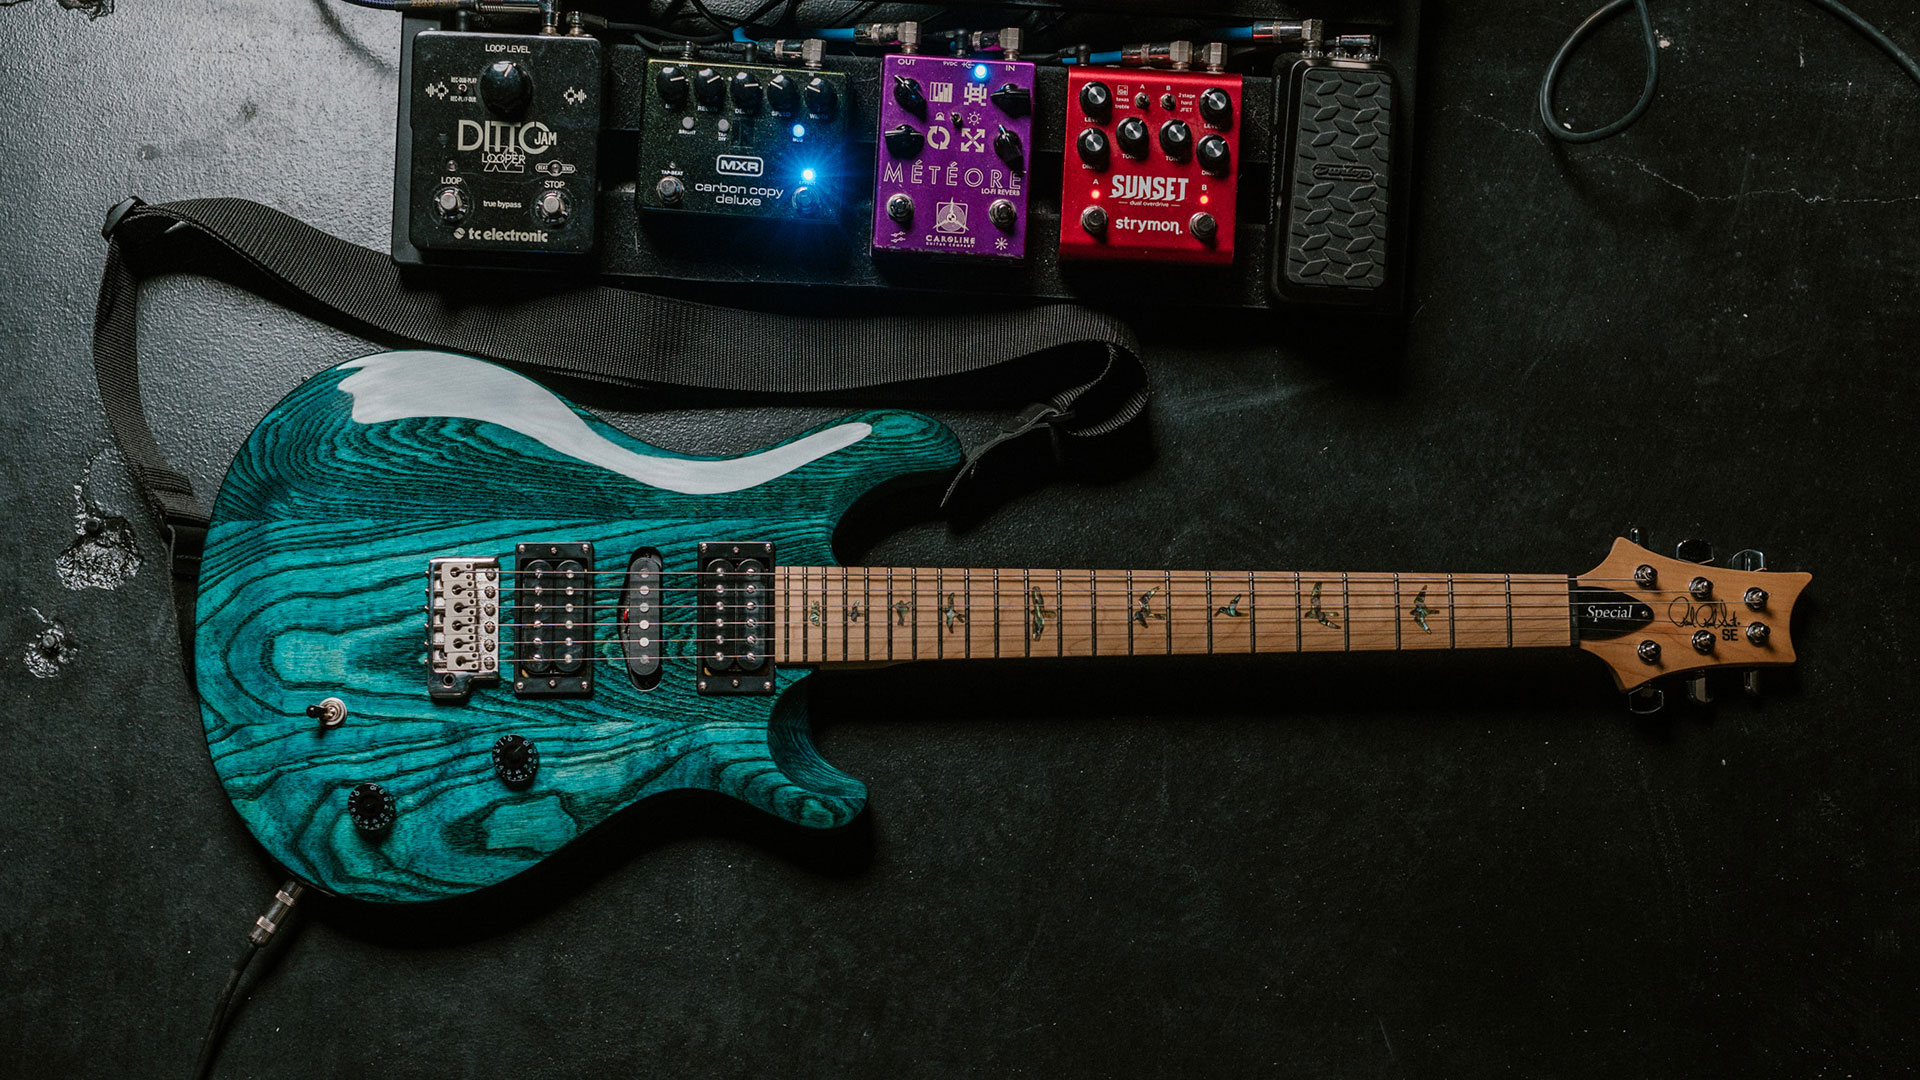 “A fresh face”: The latest PRS drop brings back one of the most distinctive guitars in its history – and it’s only available as an SE